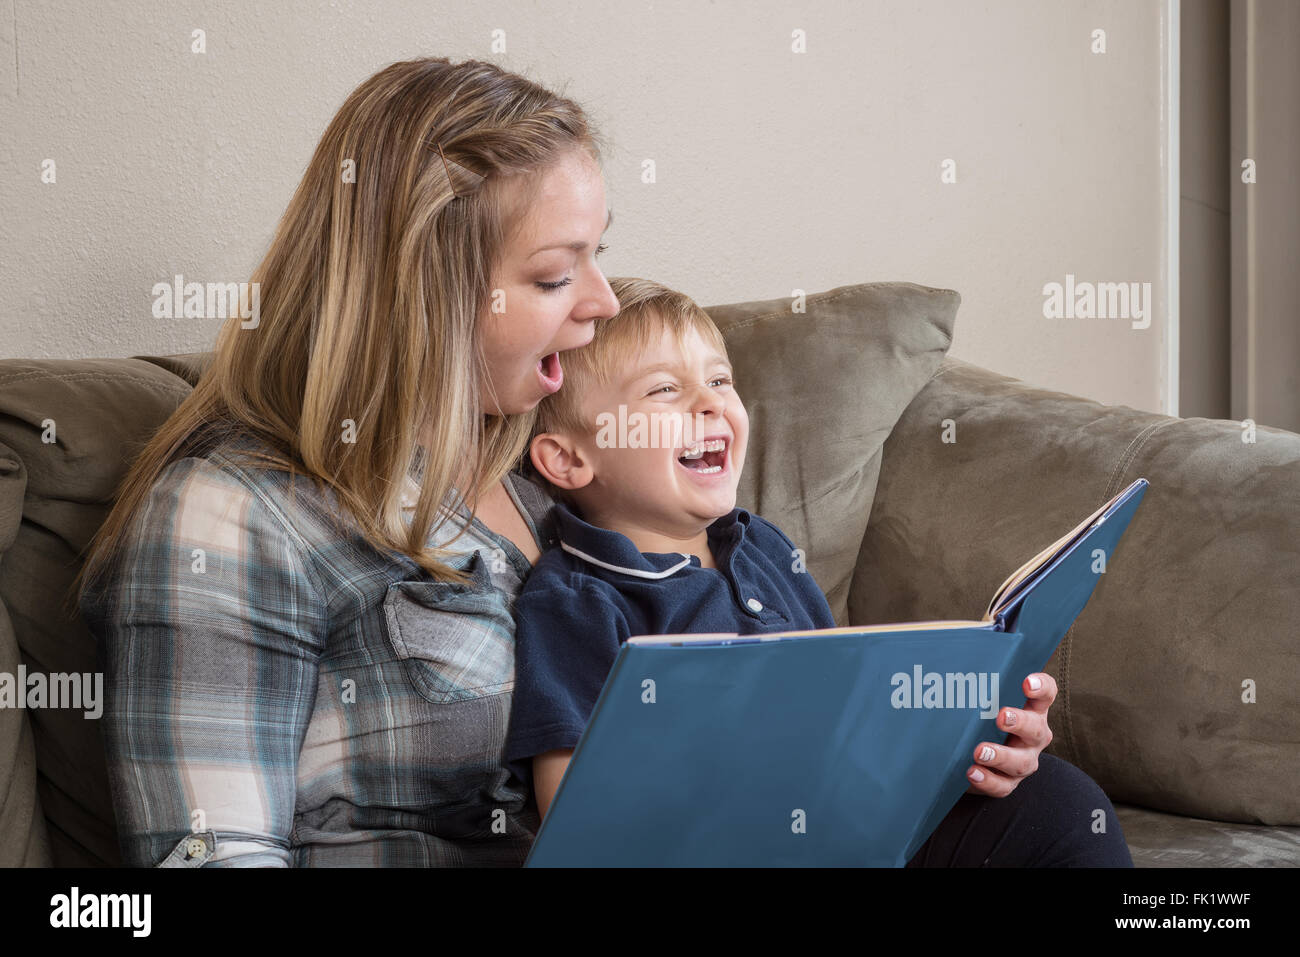 A young boy laughs as his mother reads him a story with great expression. Stock Photo